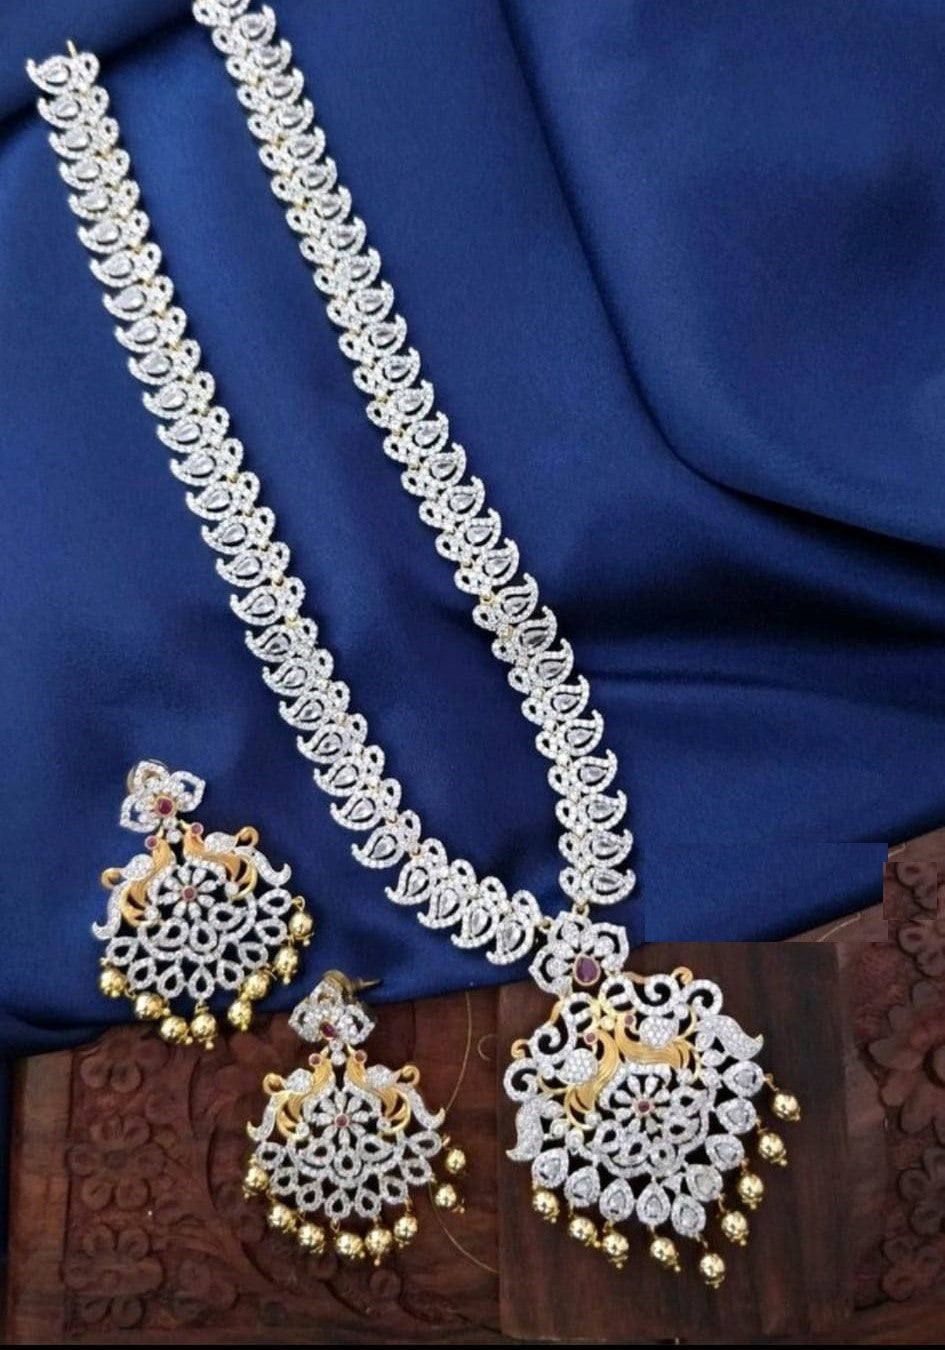 Grand Looking Long Necklace Haar Aaram With White Stones And Matching Earrings